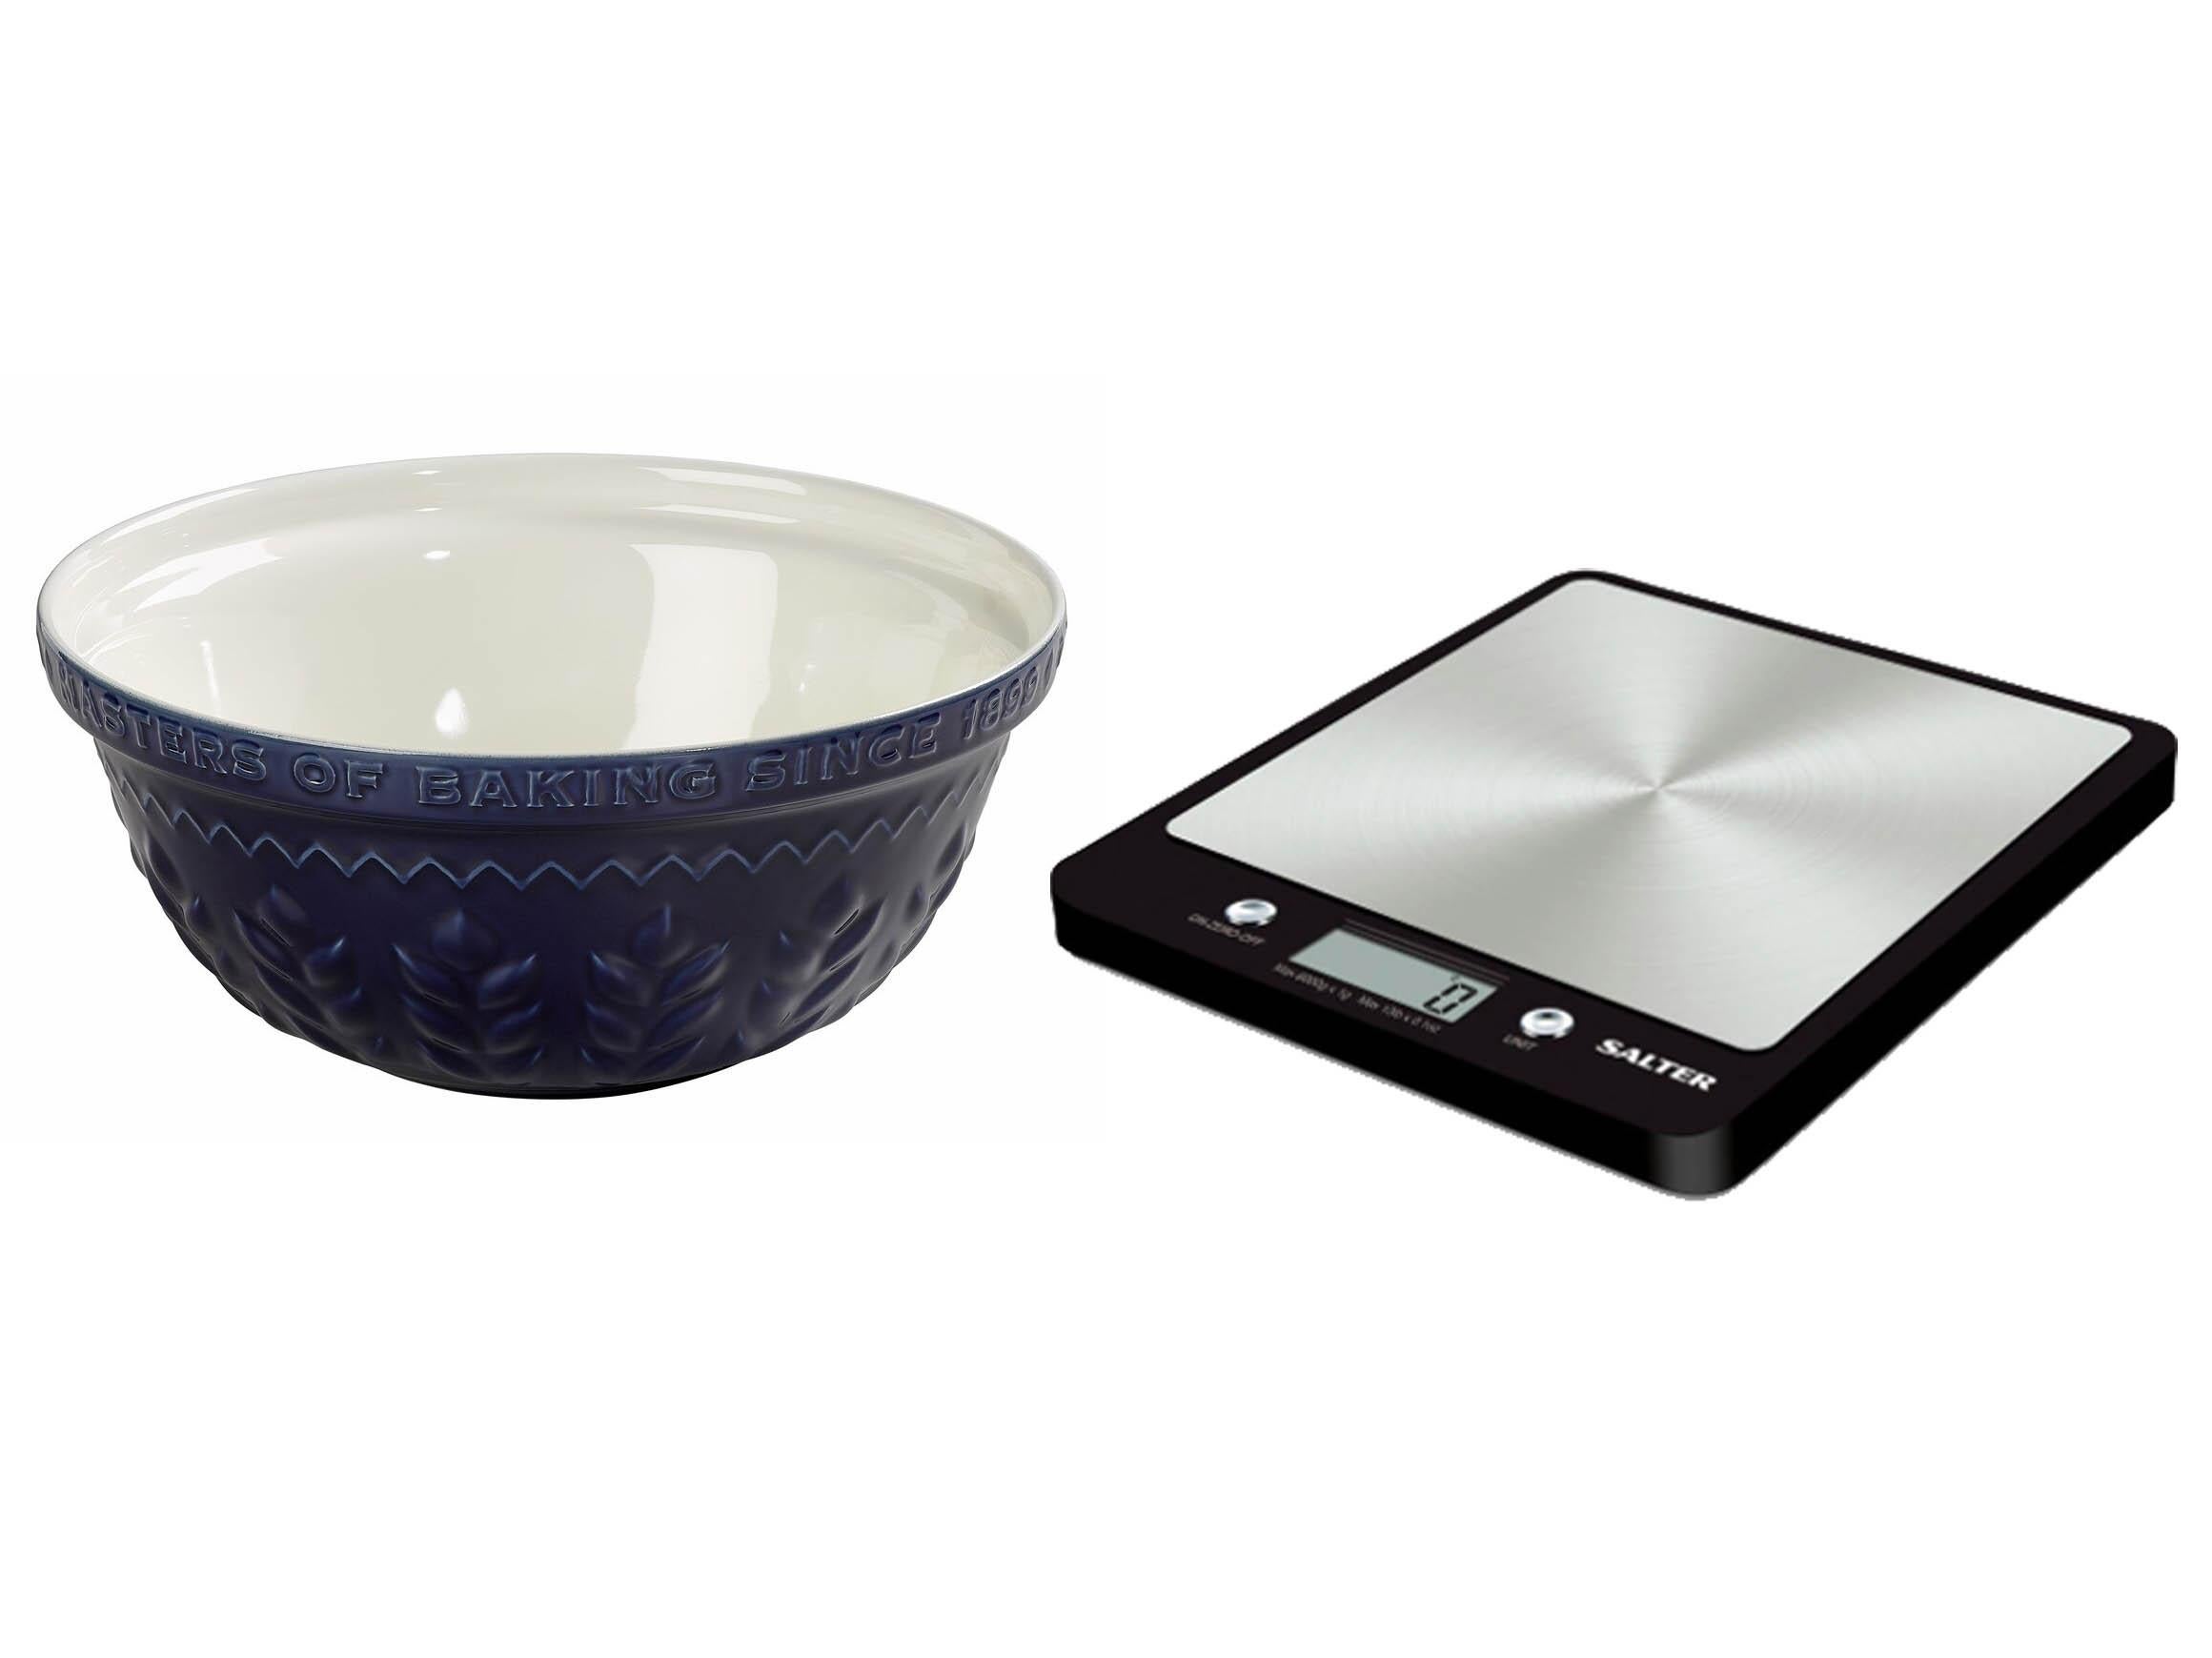 A large stoneware mixing bowl, like this one from Tala £30.99, and Salt evo digital scales, £20, are two baking essentials